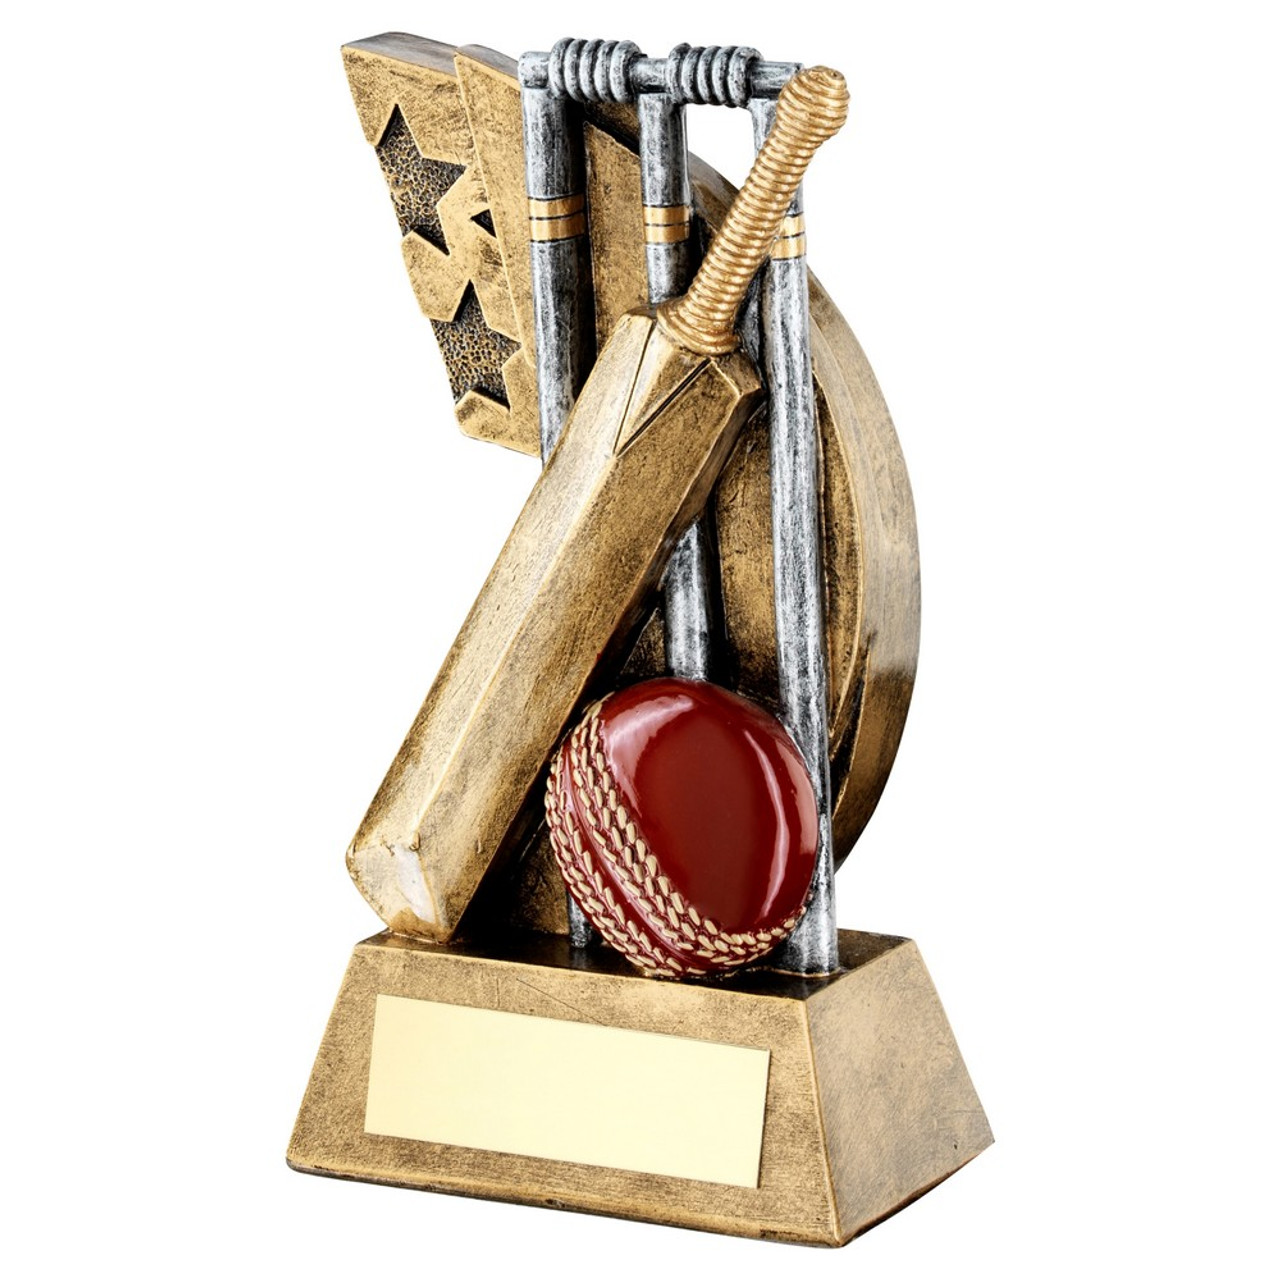 cricket bat and ball and wickets